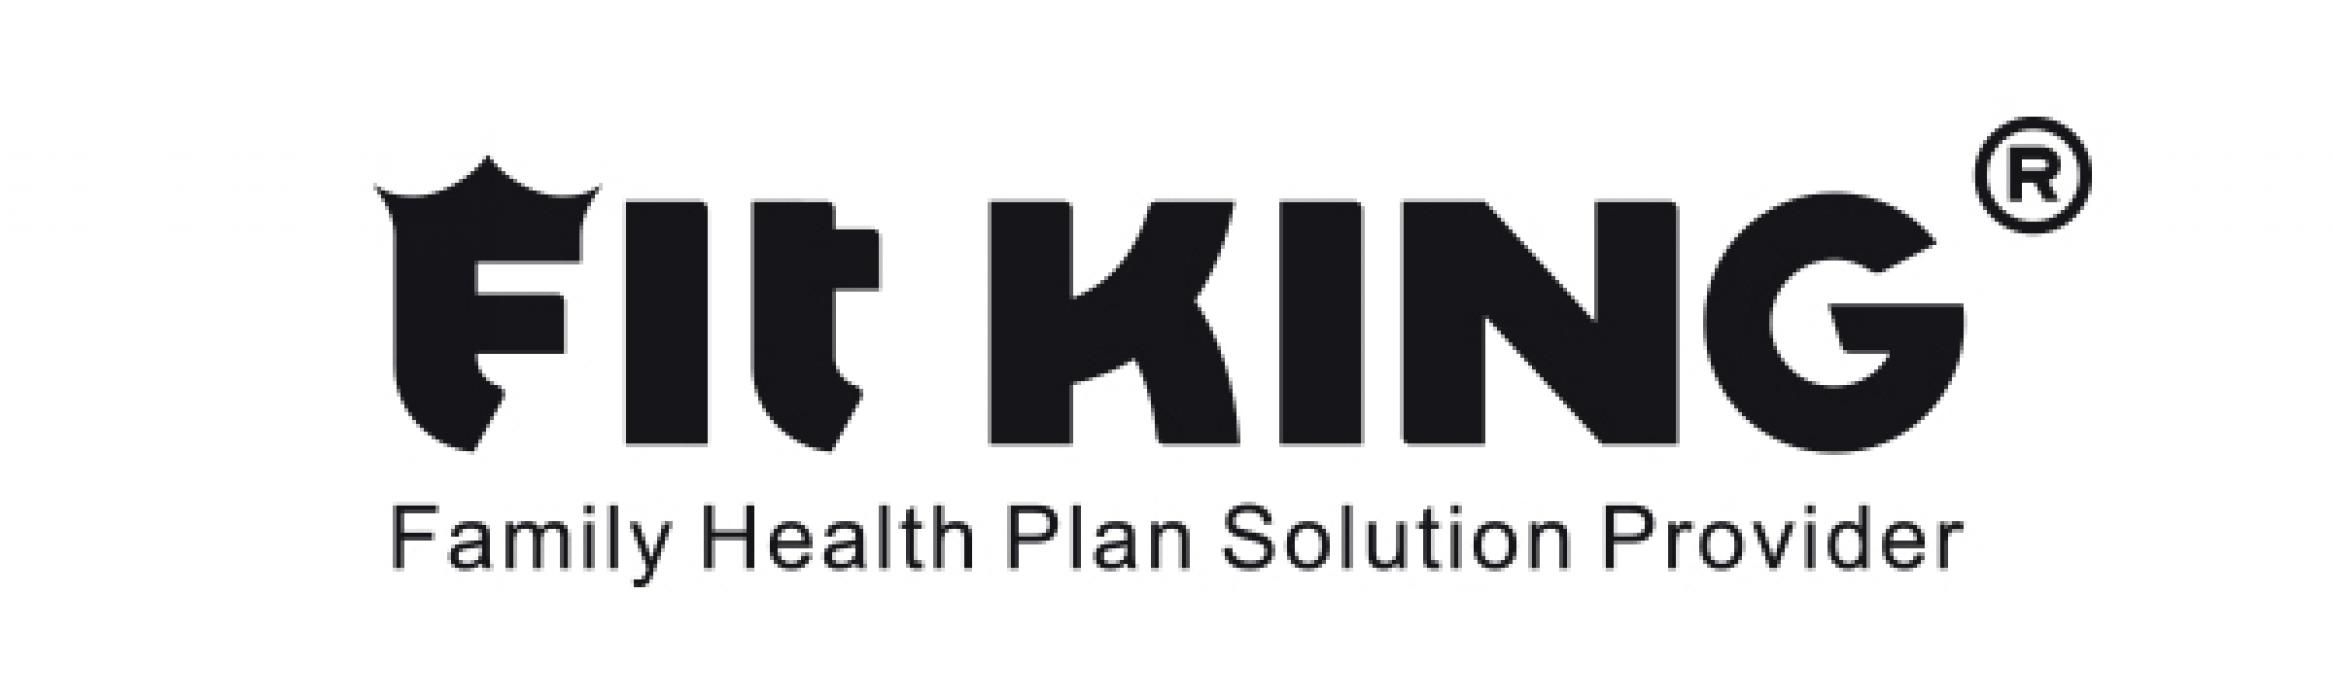 FIT KING, A PROFESSIONAL FAMILY HEALTH PLAN SOLUTION PROVIDER